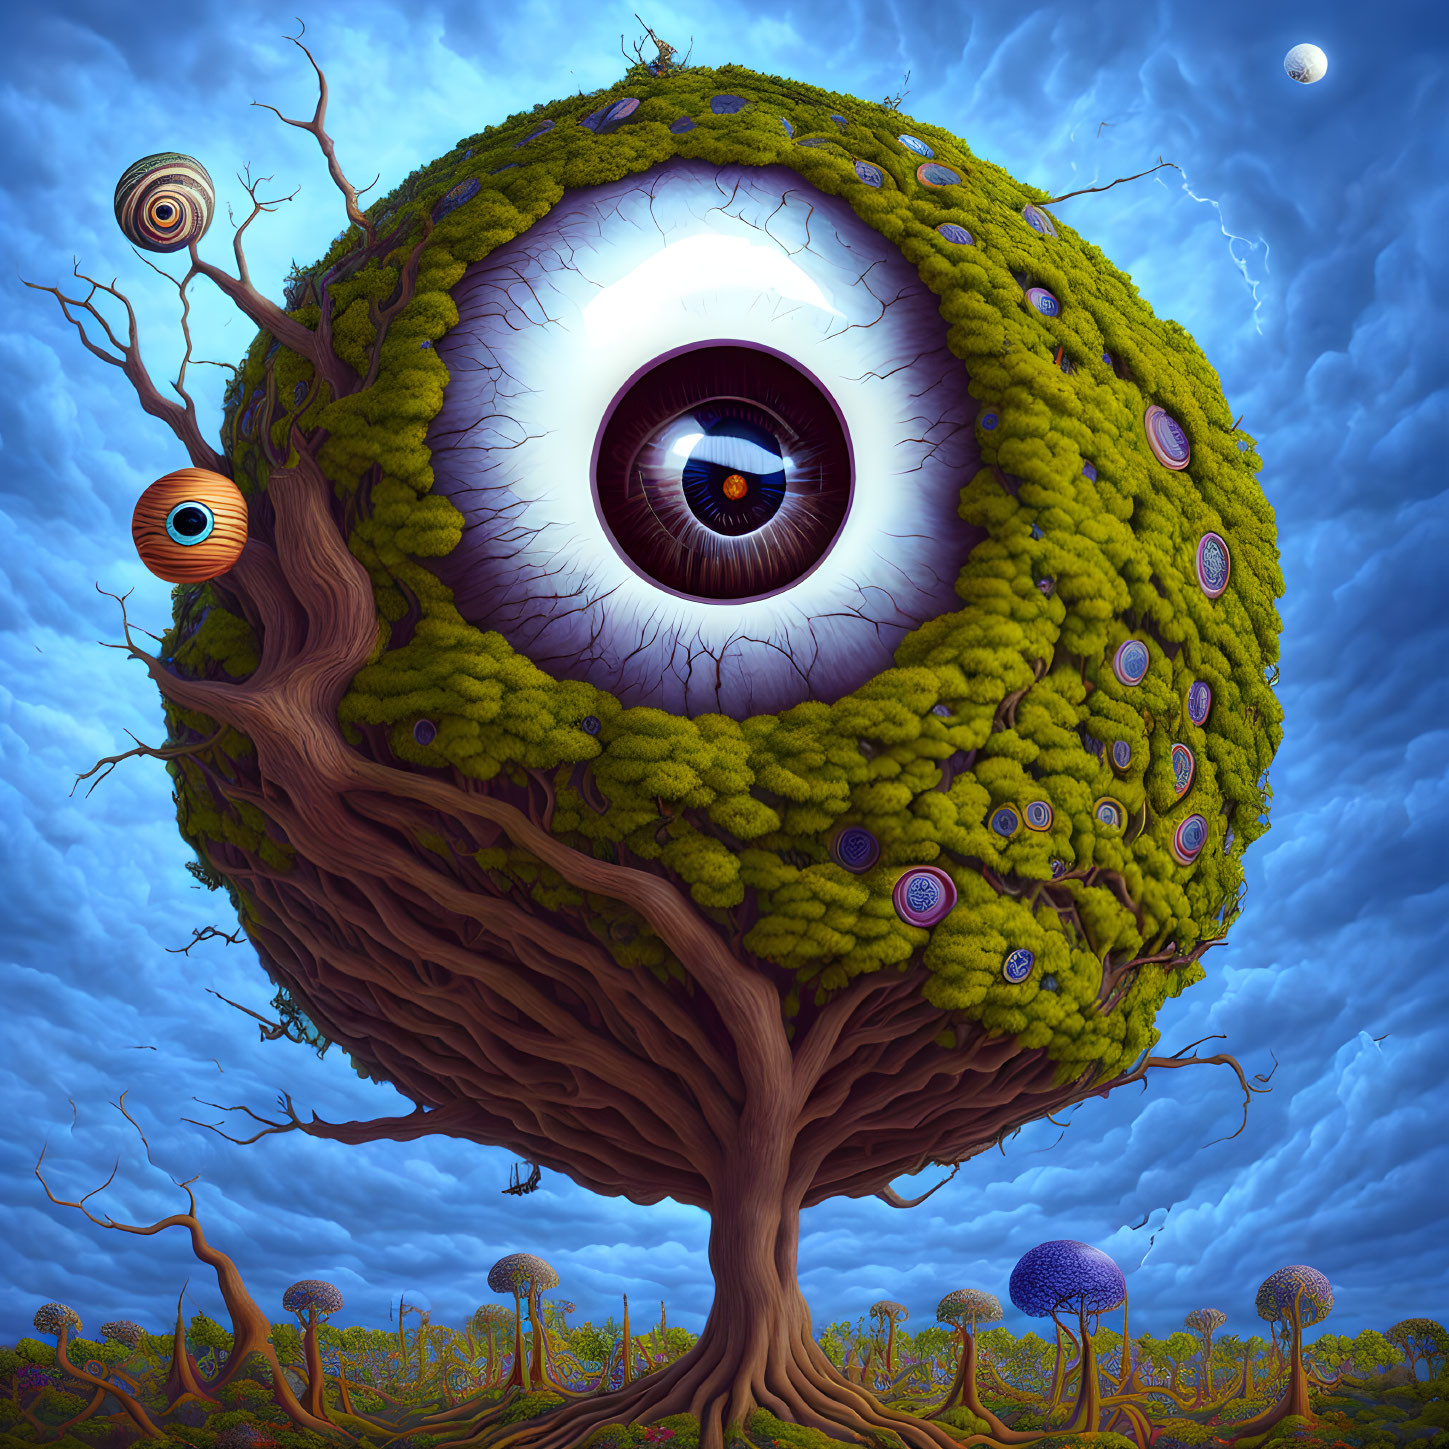 Surreal illustration of eye-shaped tree canopy with moss and fungi in fantastical landscape